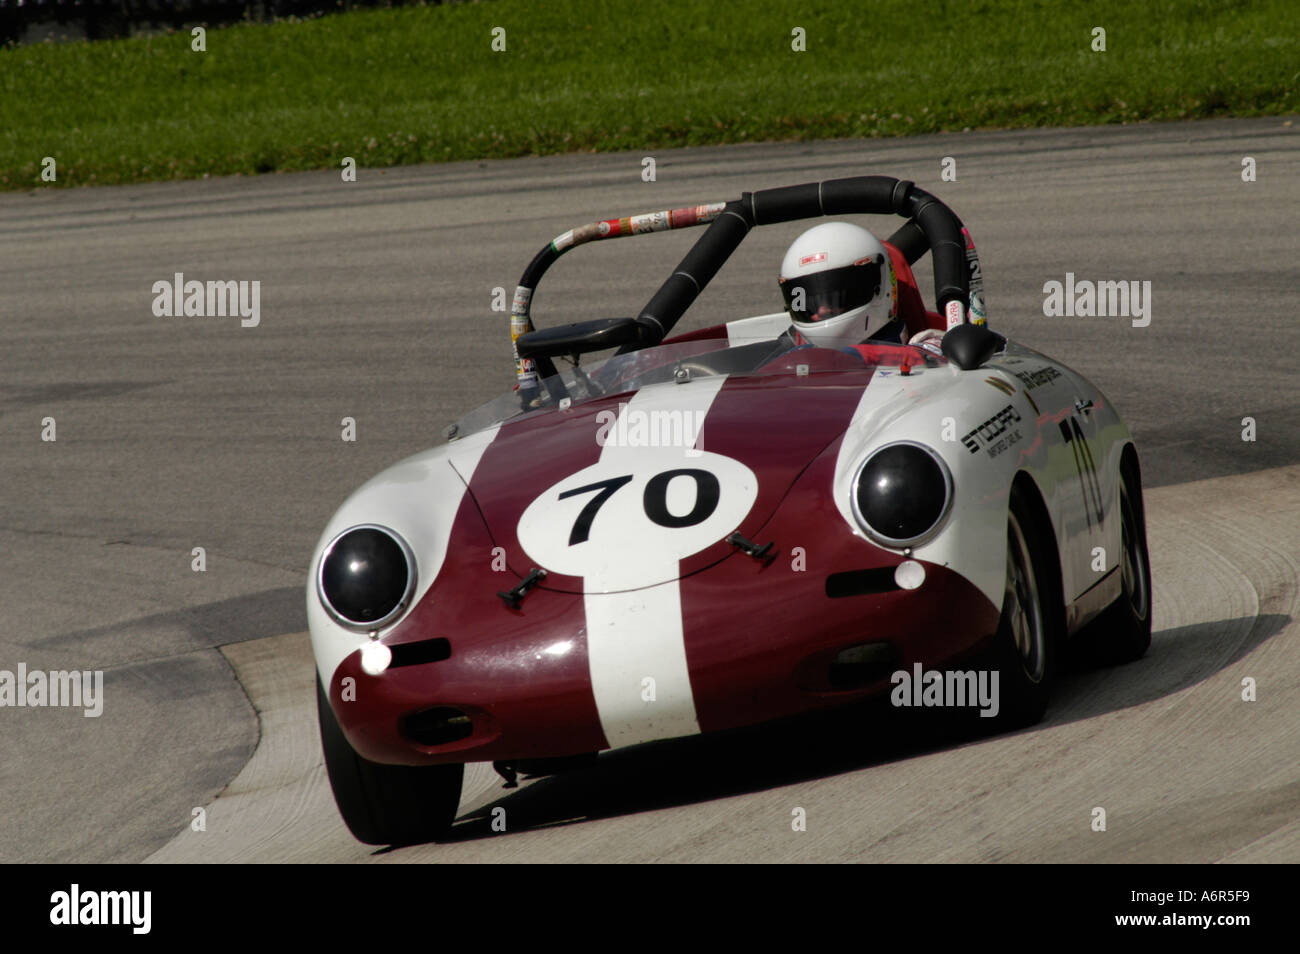 Vic Skirmants Races His 1961 Porsche 356 Roadster At The Svra Sprint Stock Photo ...1300 x 954